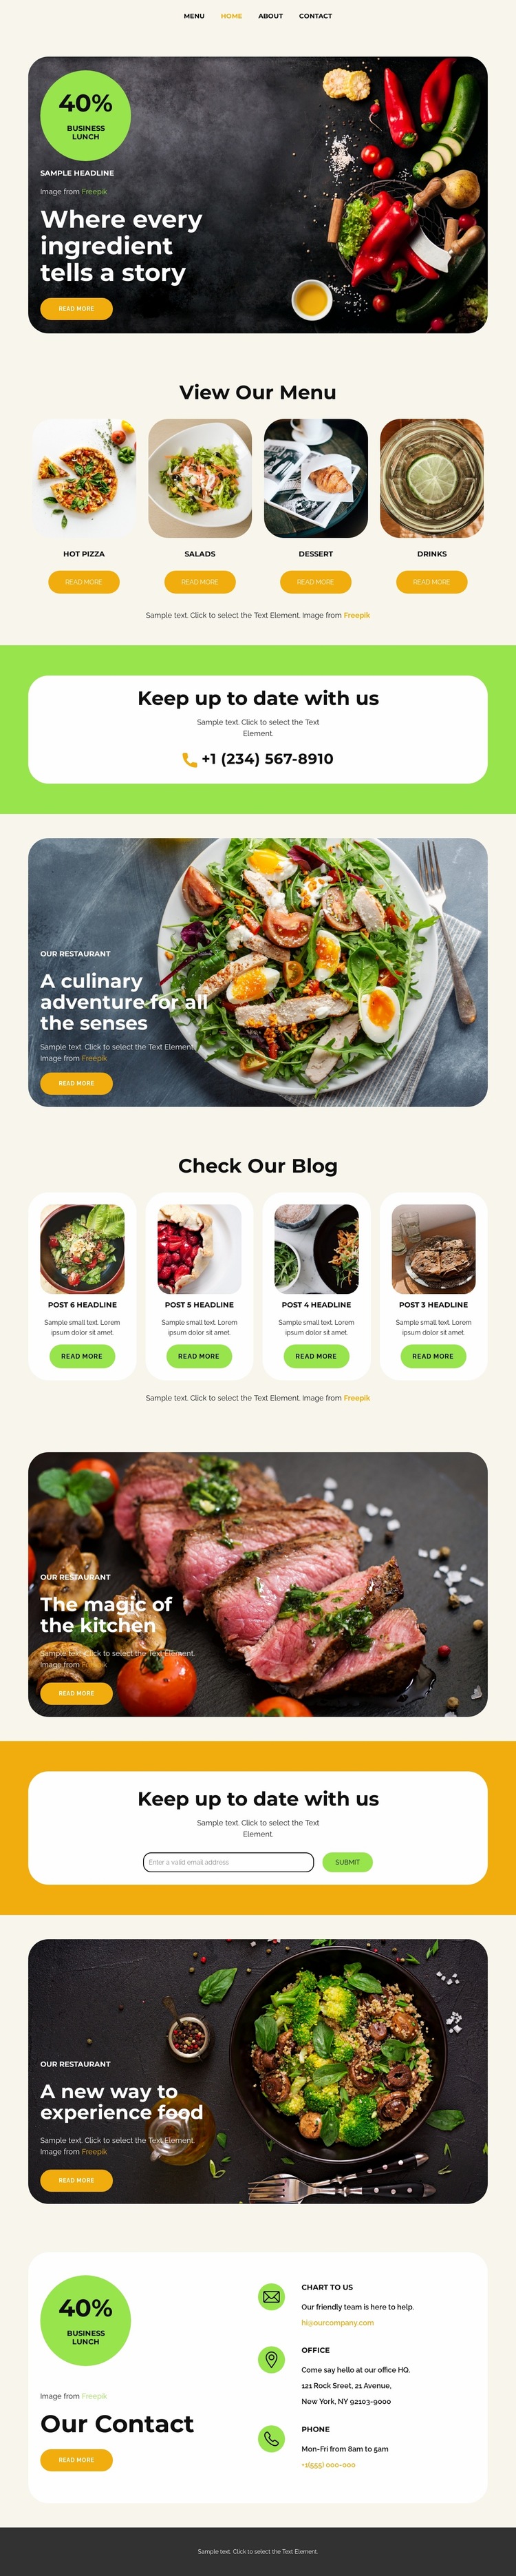 The magic of the kitchen Website Builder Templates